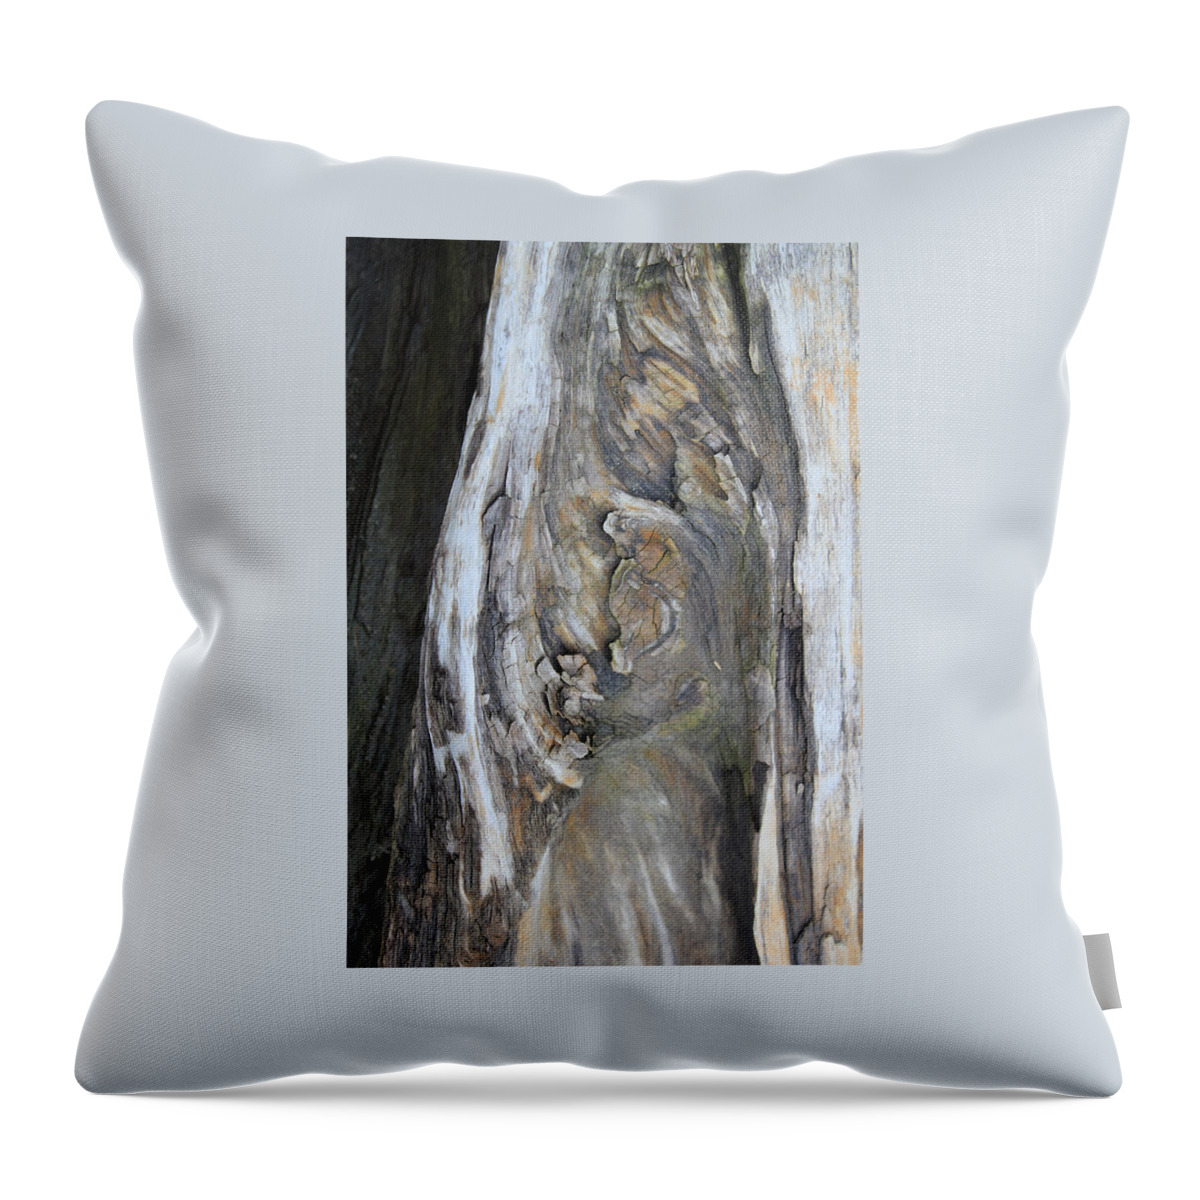 Tidal Throw Pillow featuring the photograph Untitled V - Tidal Wood by Annekathrin Hansen